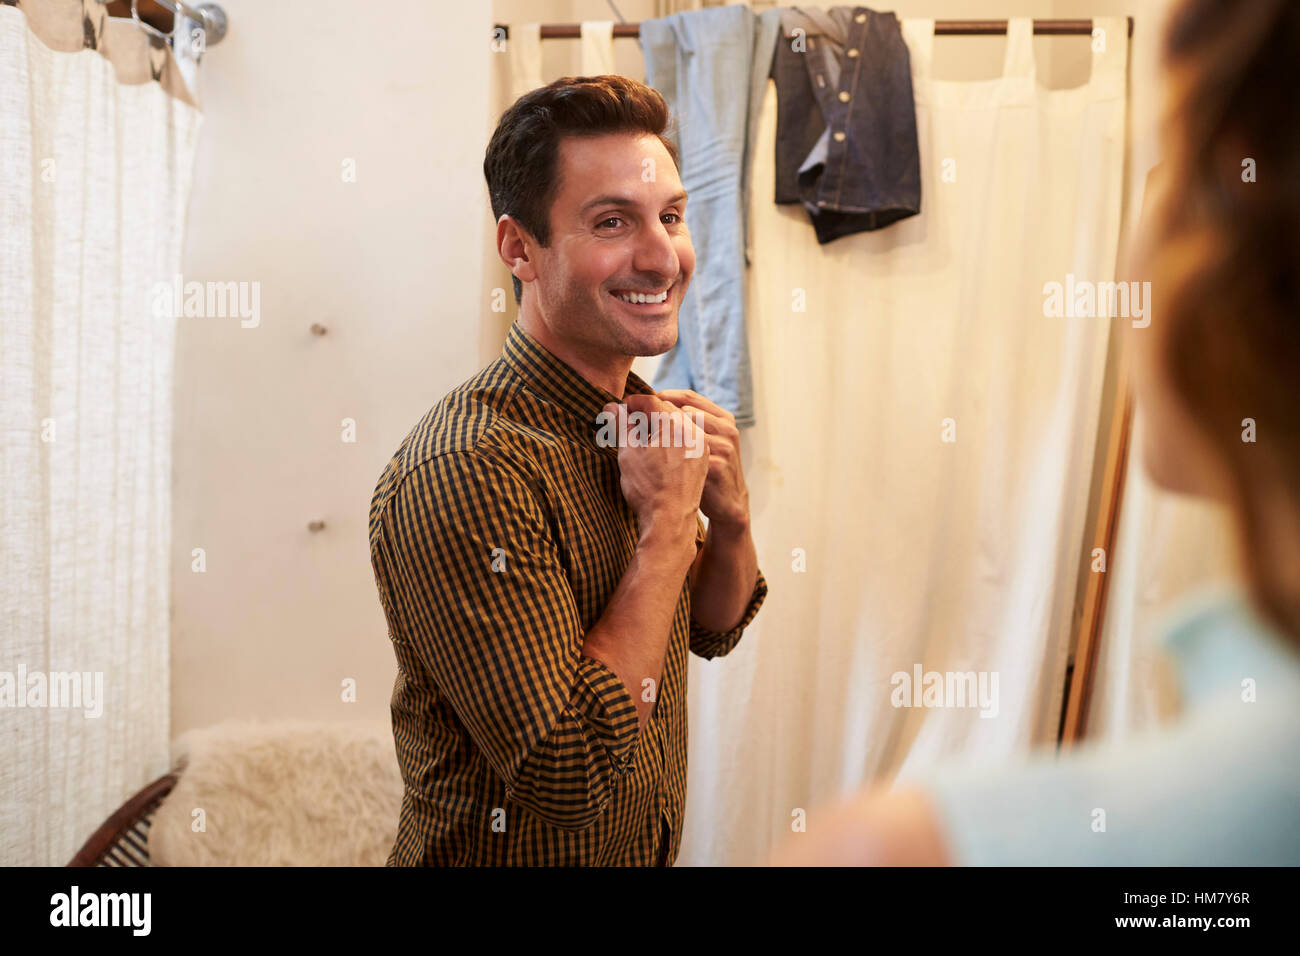 Woman watches her partner trying on shirt in changing room Stock Photo